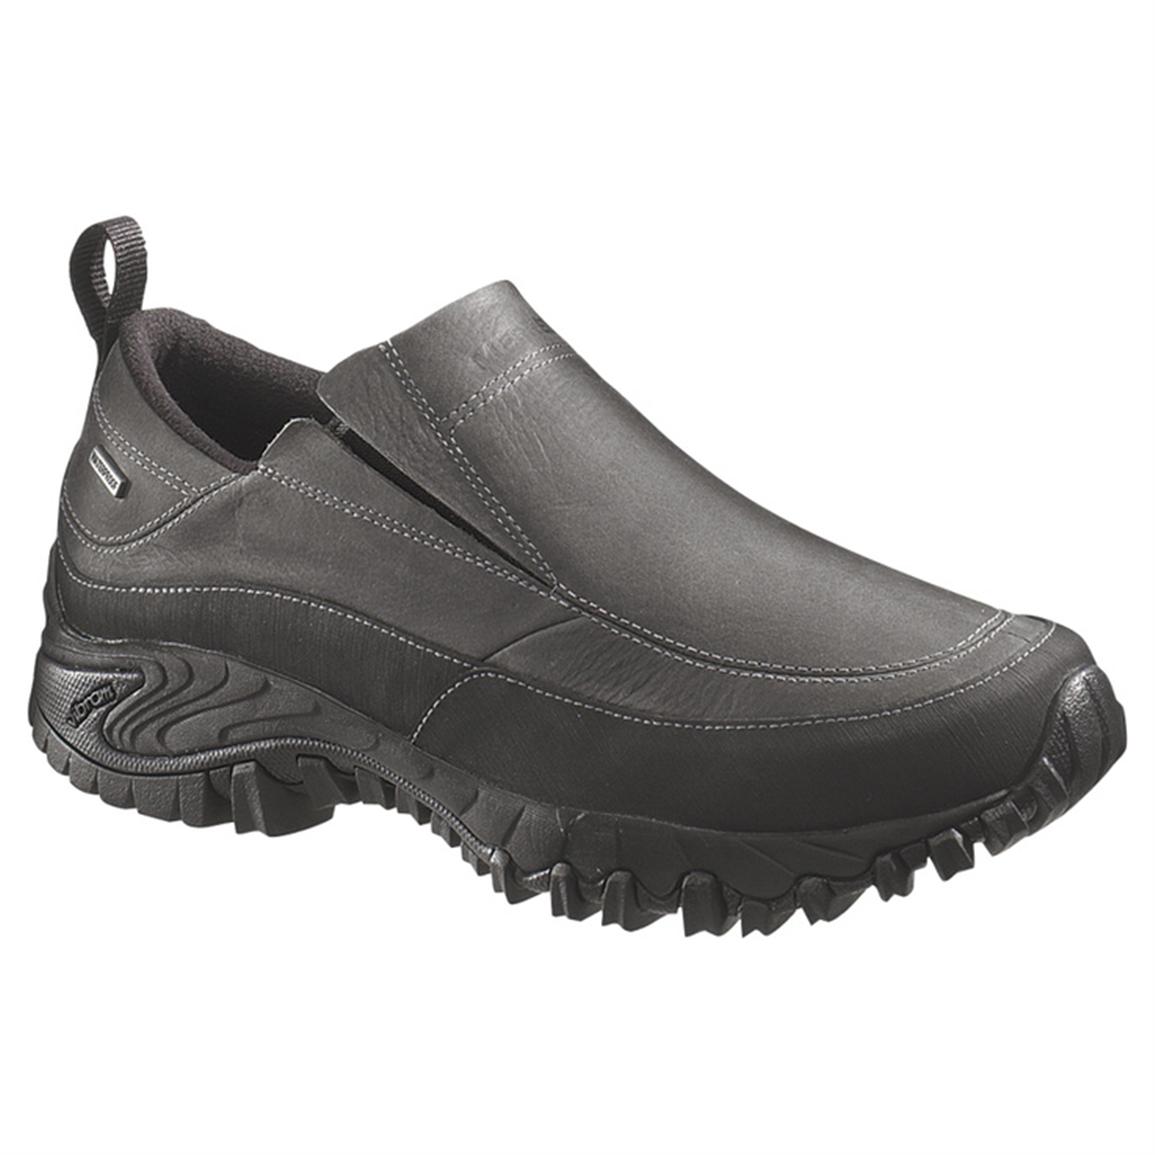 Men's Merrell Shiver Waterproof Moc 2 Slip-ons - 583682, Casual Shoes at Sportsman's Guide